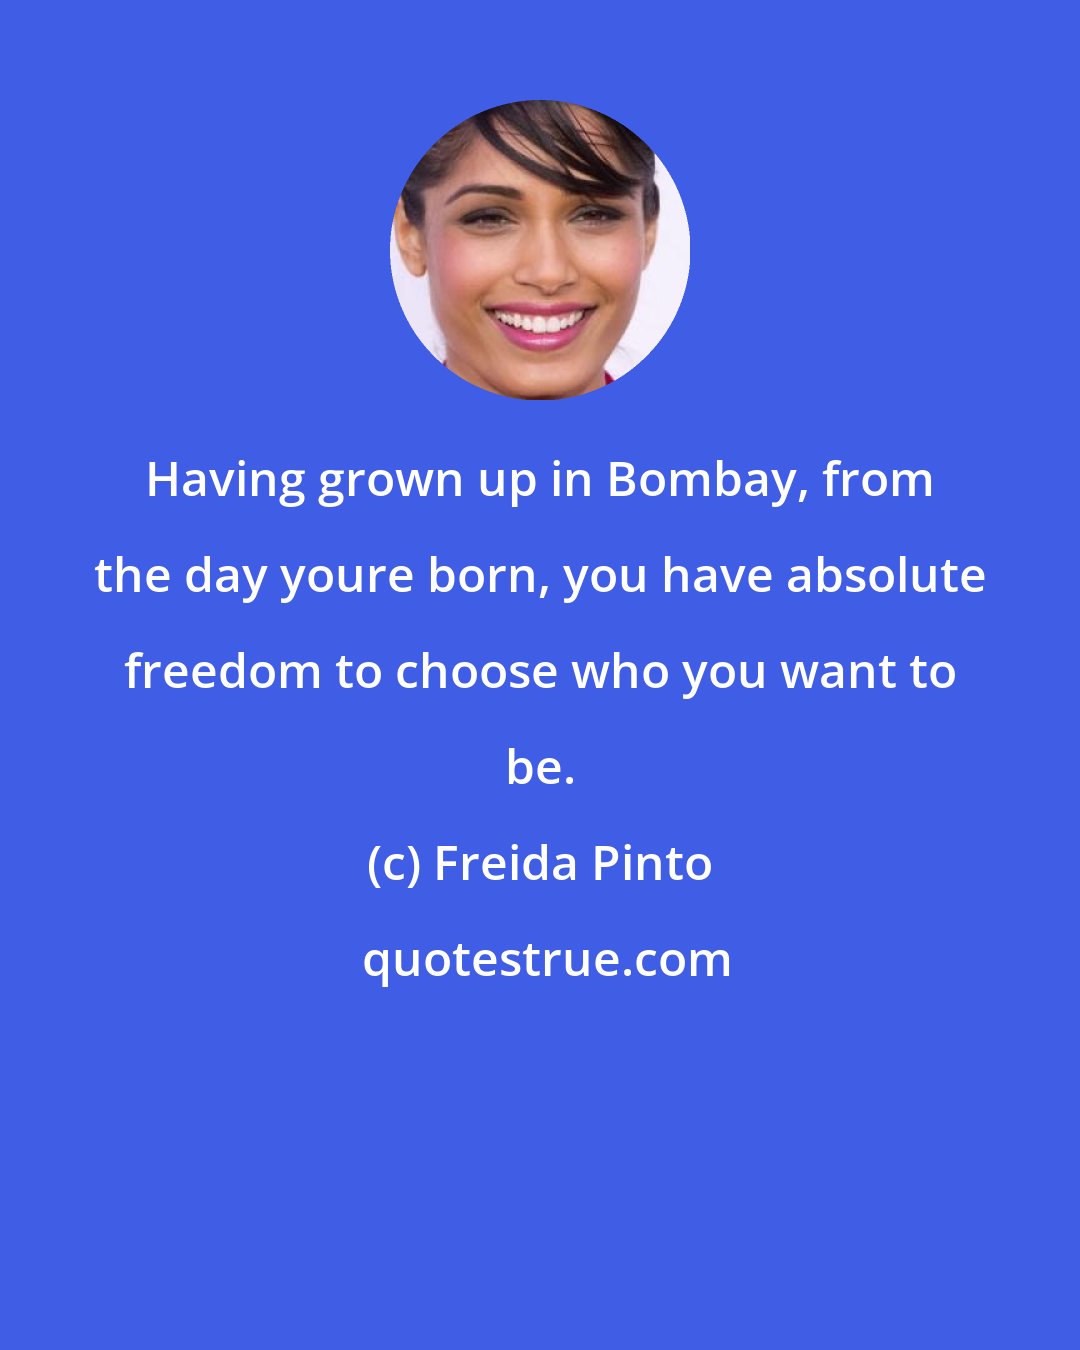 Freida Pinto: Having grown up in Bombay, from the day youre born, you have absolute freedom to choose who you want to be.